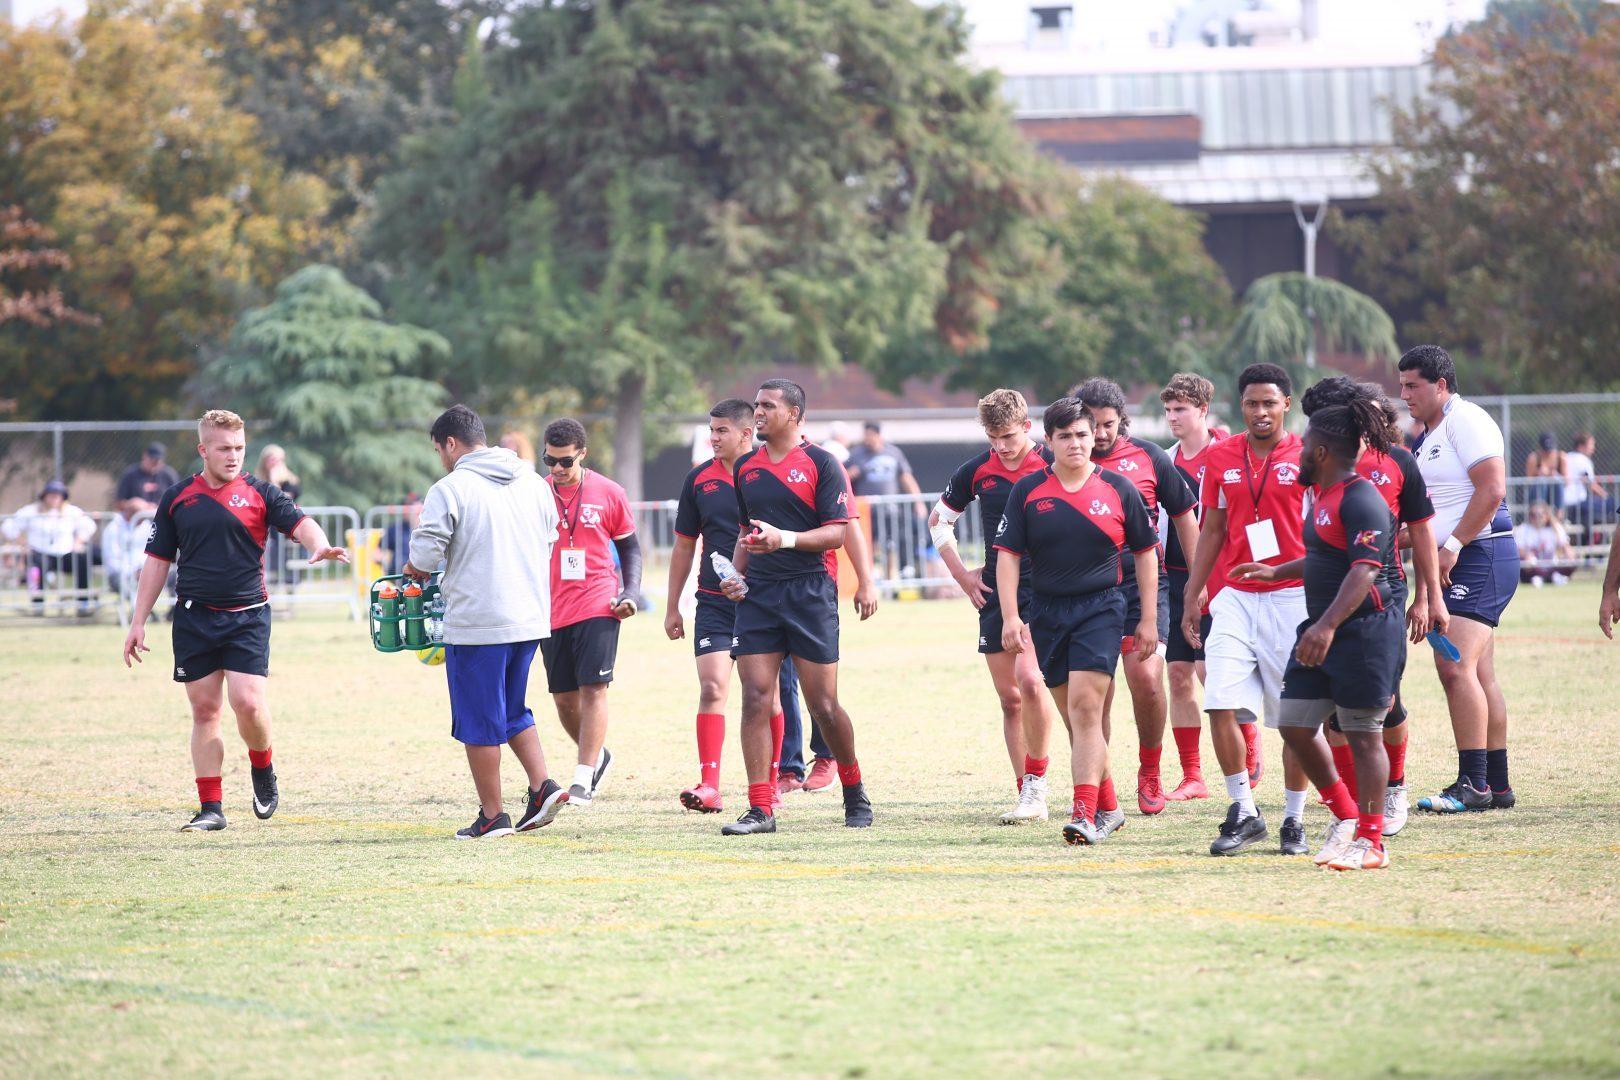 The+Fresno+State+mens+rugby+team+during+the+PWRC+Championship+final+at+the+Kinesiology+Field+at+Fresno+State+on+Saturday%2C+Nov.+03%2C+2018.+%28Jorge+Rodriguez%2FThe+Collegian%29